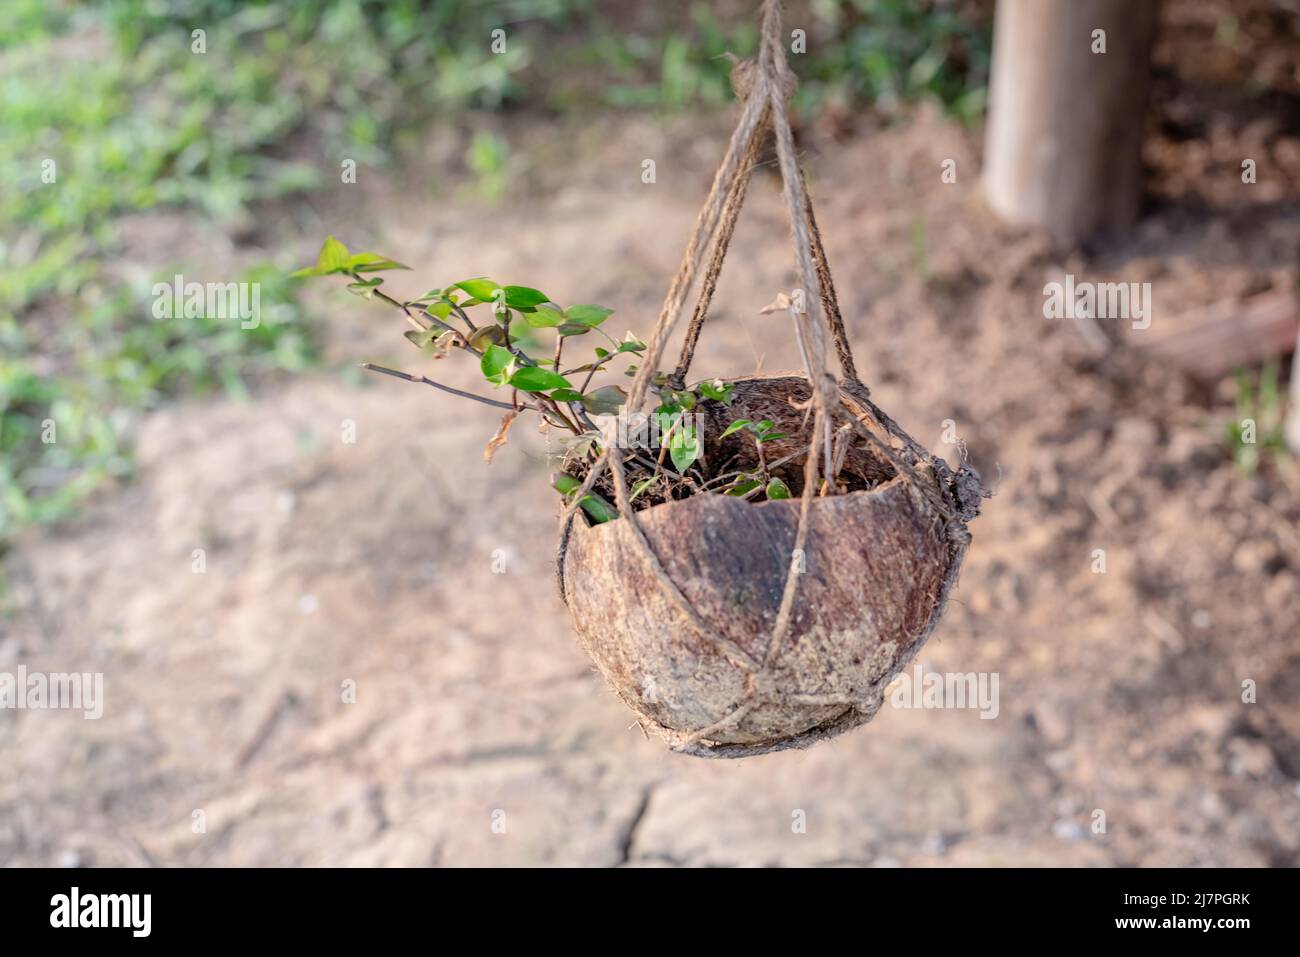 plant cultivated on coconut husk Stock Photo